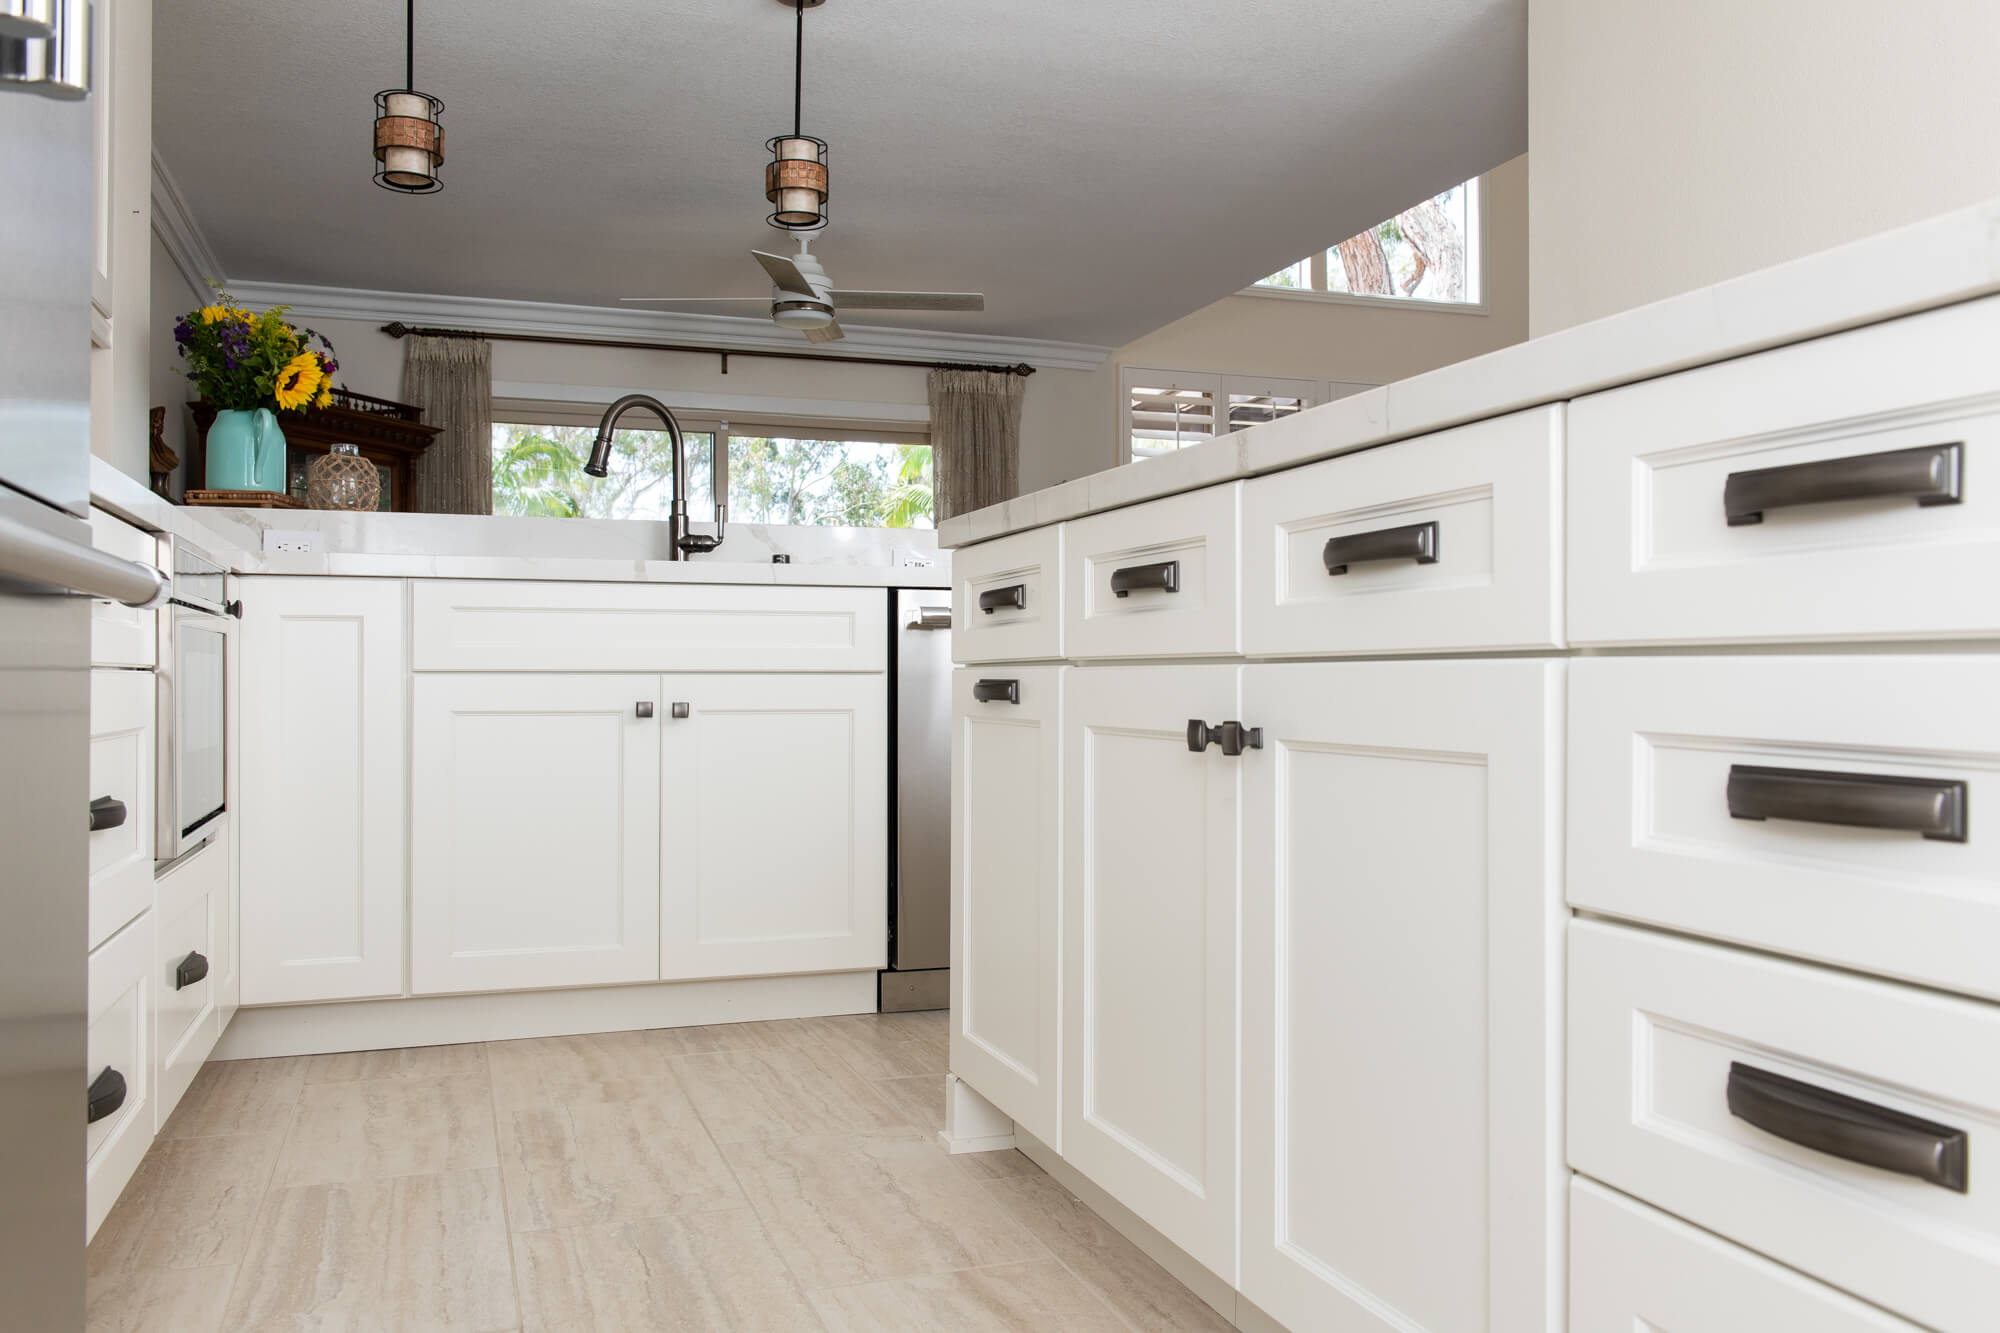 Kitchen Remodel With White Cabinetry on Perimeter and Island